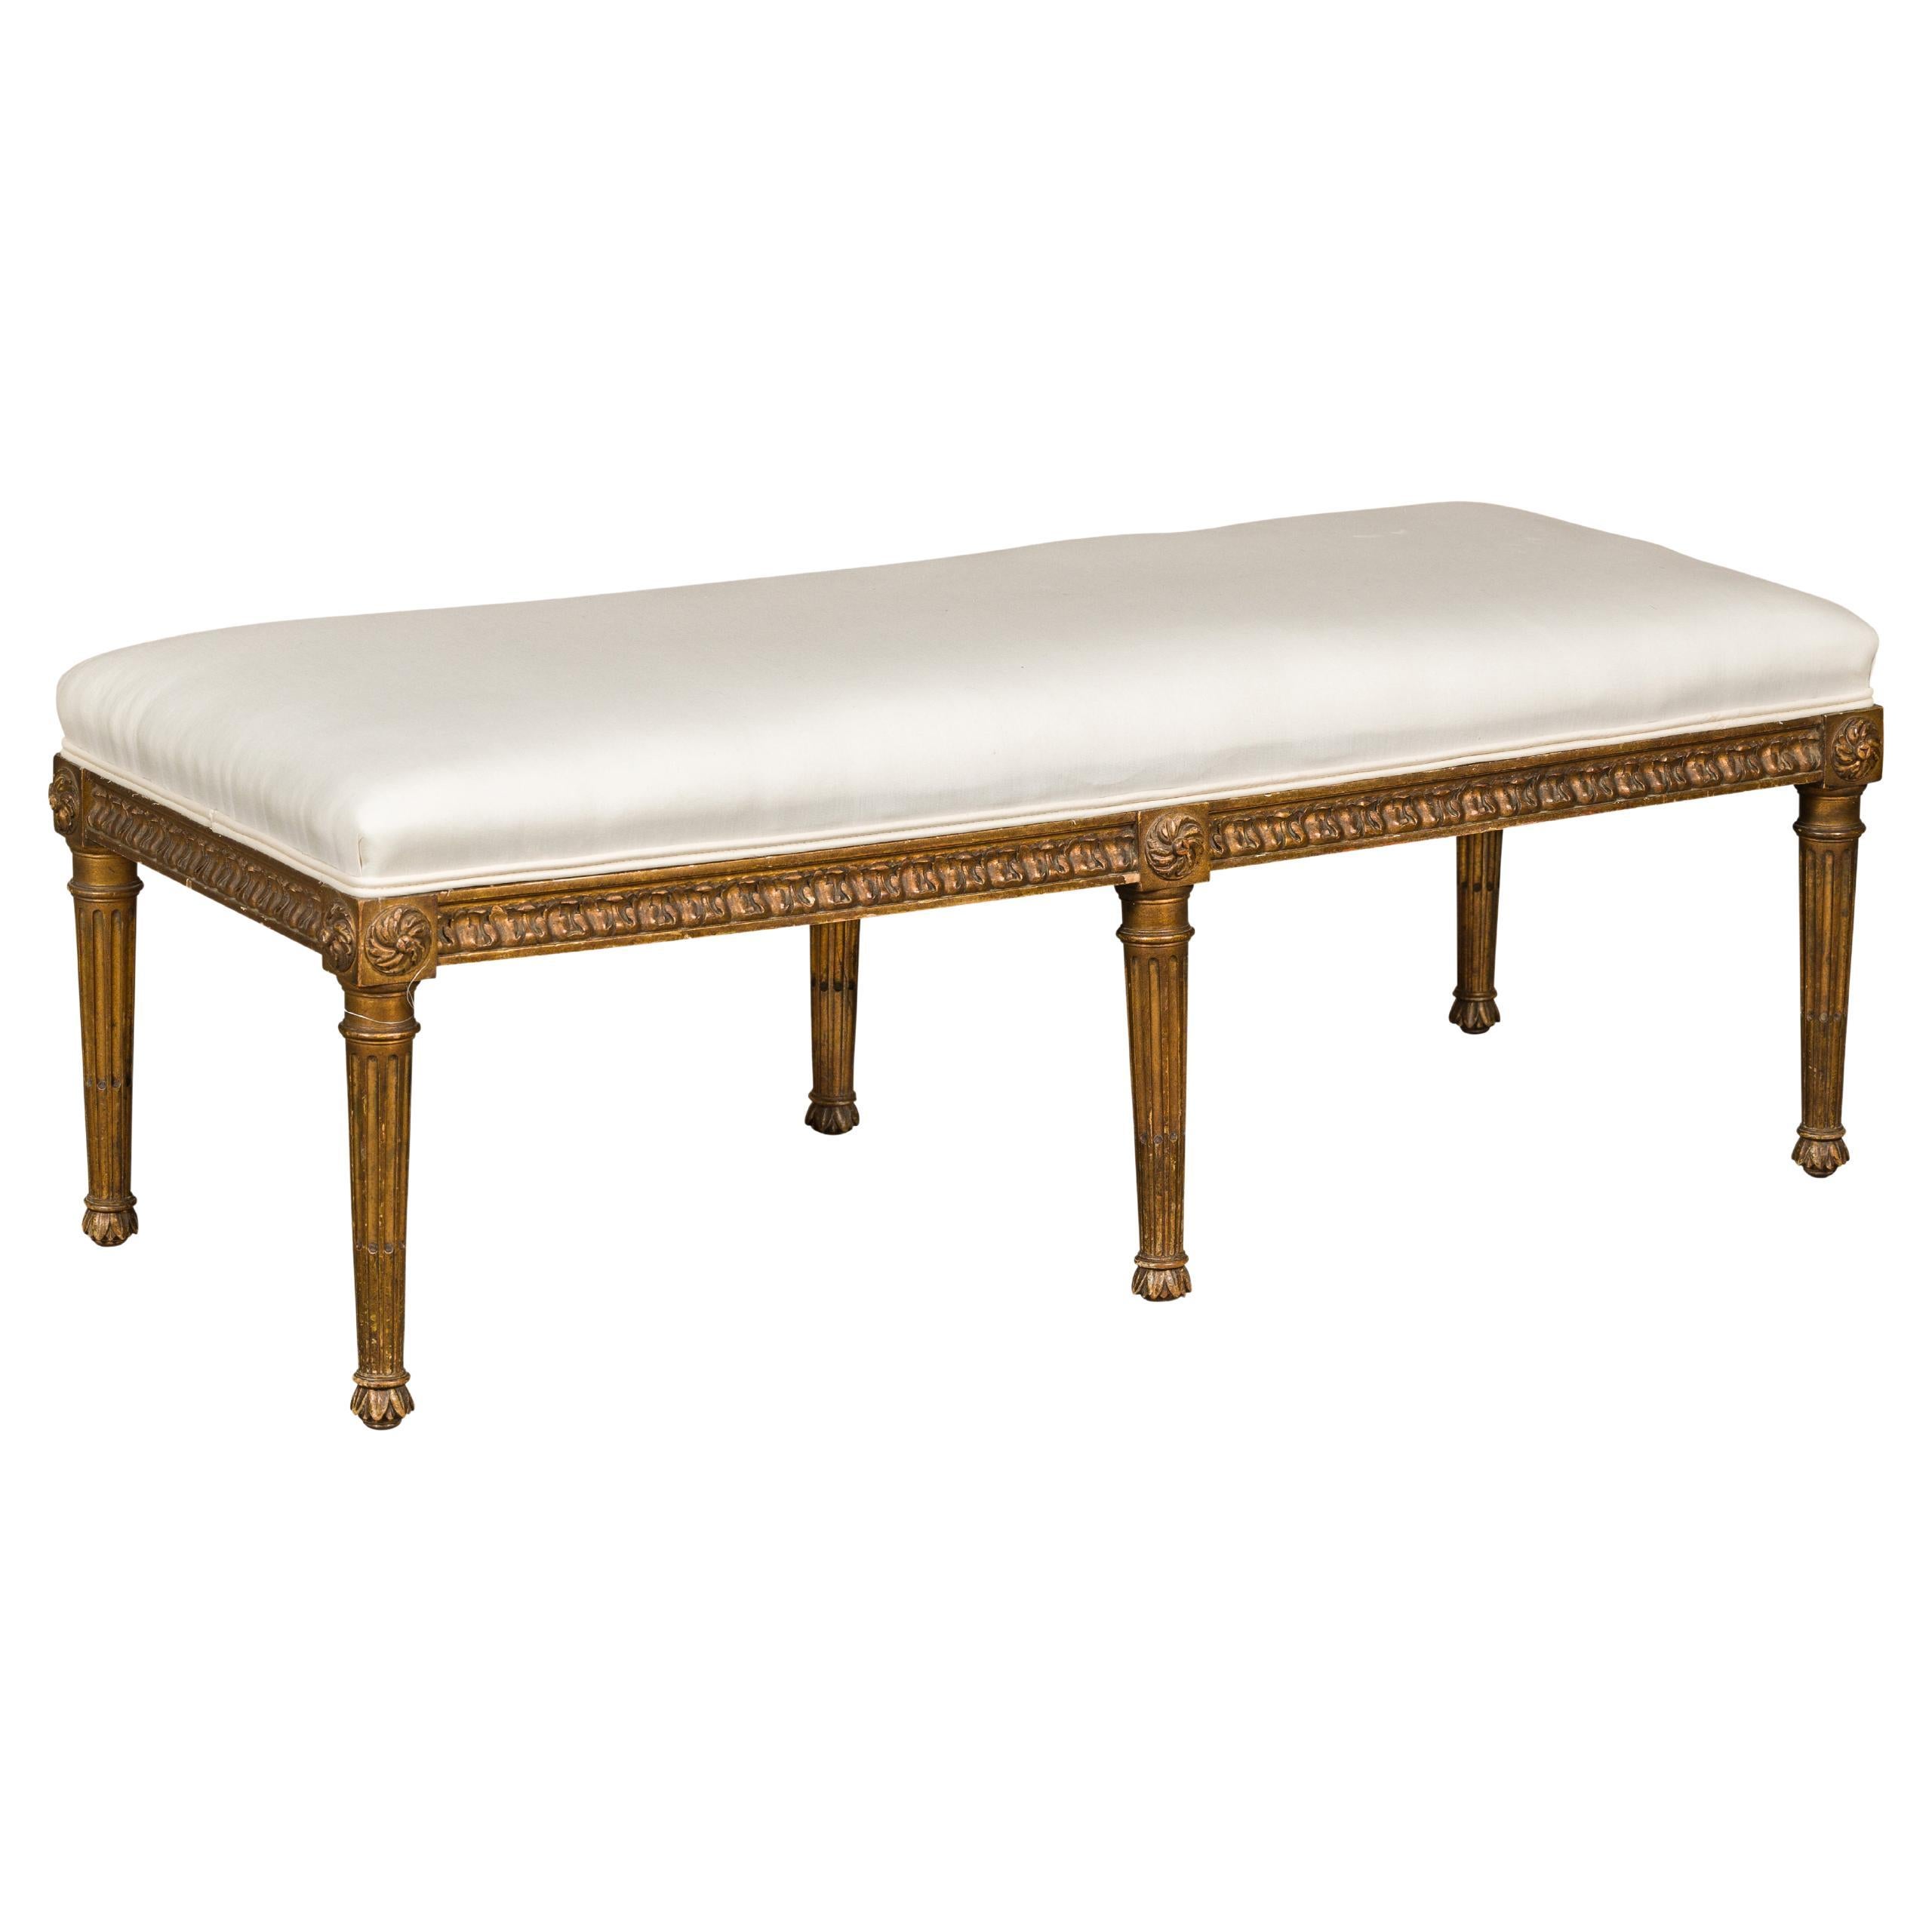 French 1920s Neoclassical Style Gilt Wood Bench with Carved Frieze